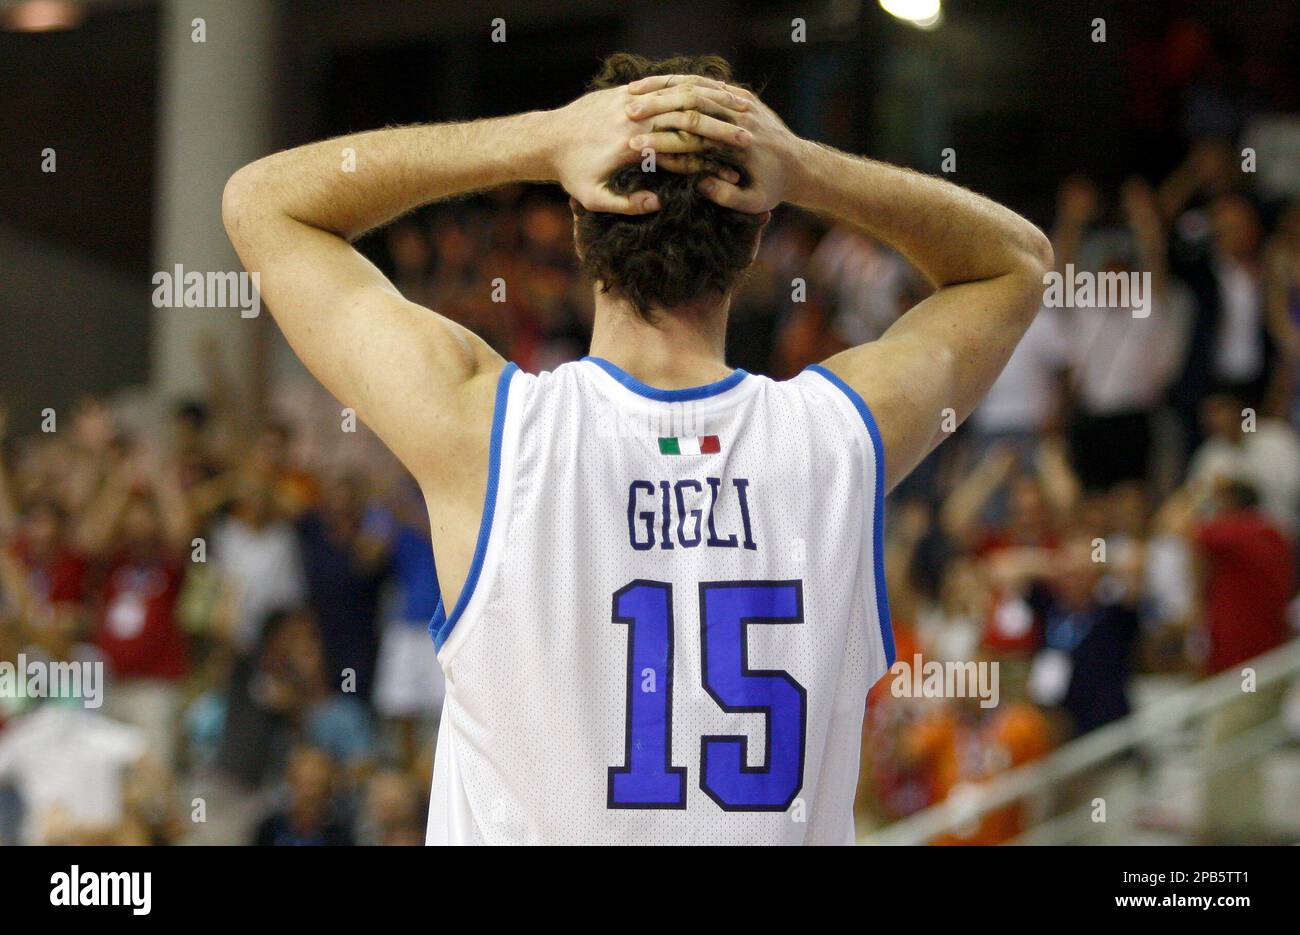 Italys national basketball team player Luigi Da Tome reacts after losing their basketball match against Slovenia during their group D match of the preliminary round of the Eurobasket Championship in Alicante, Monday